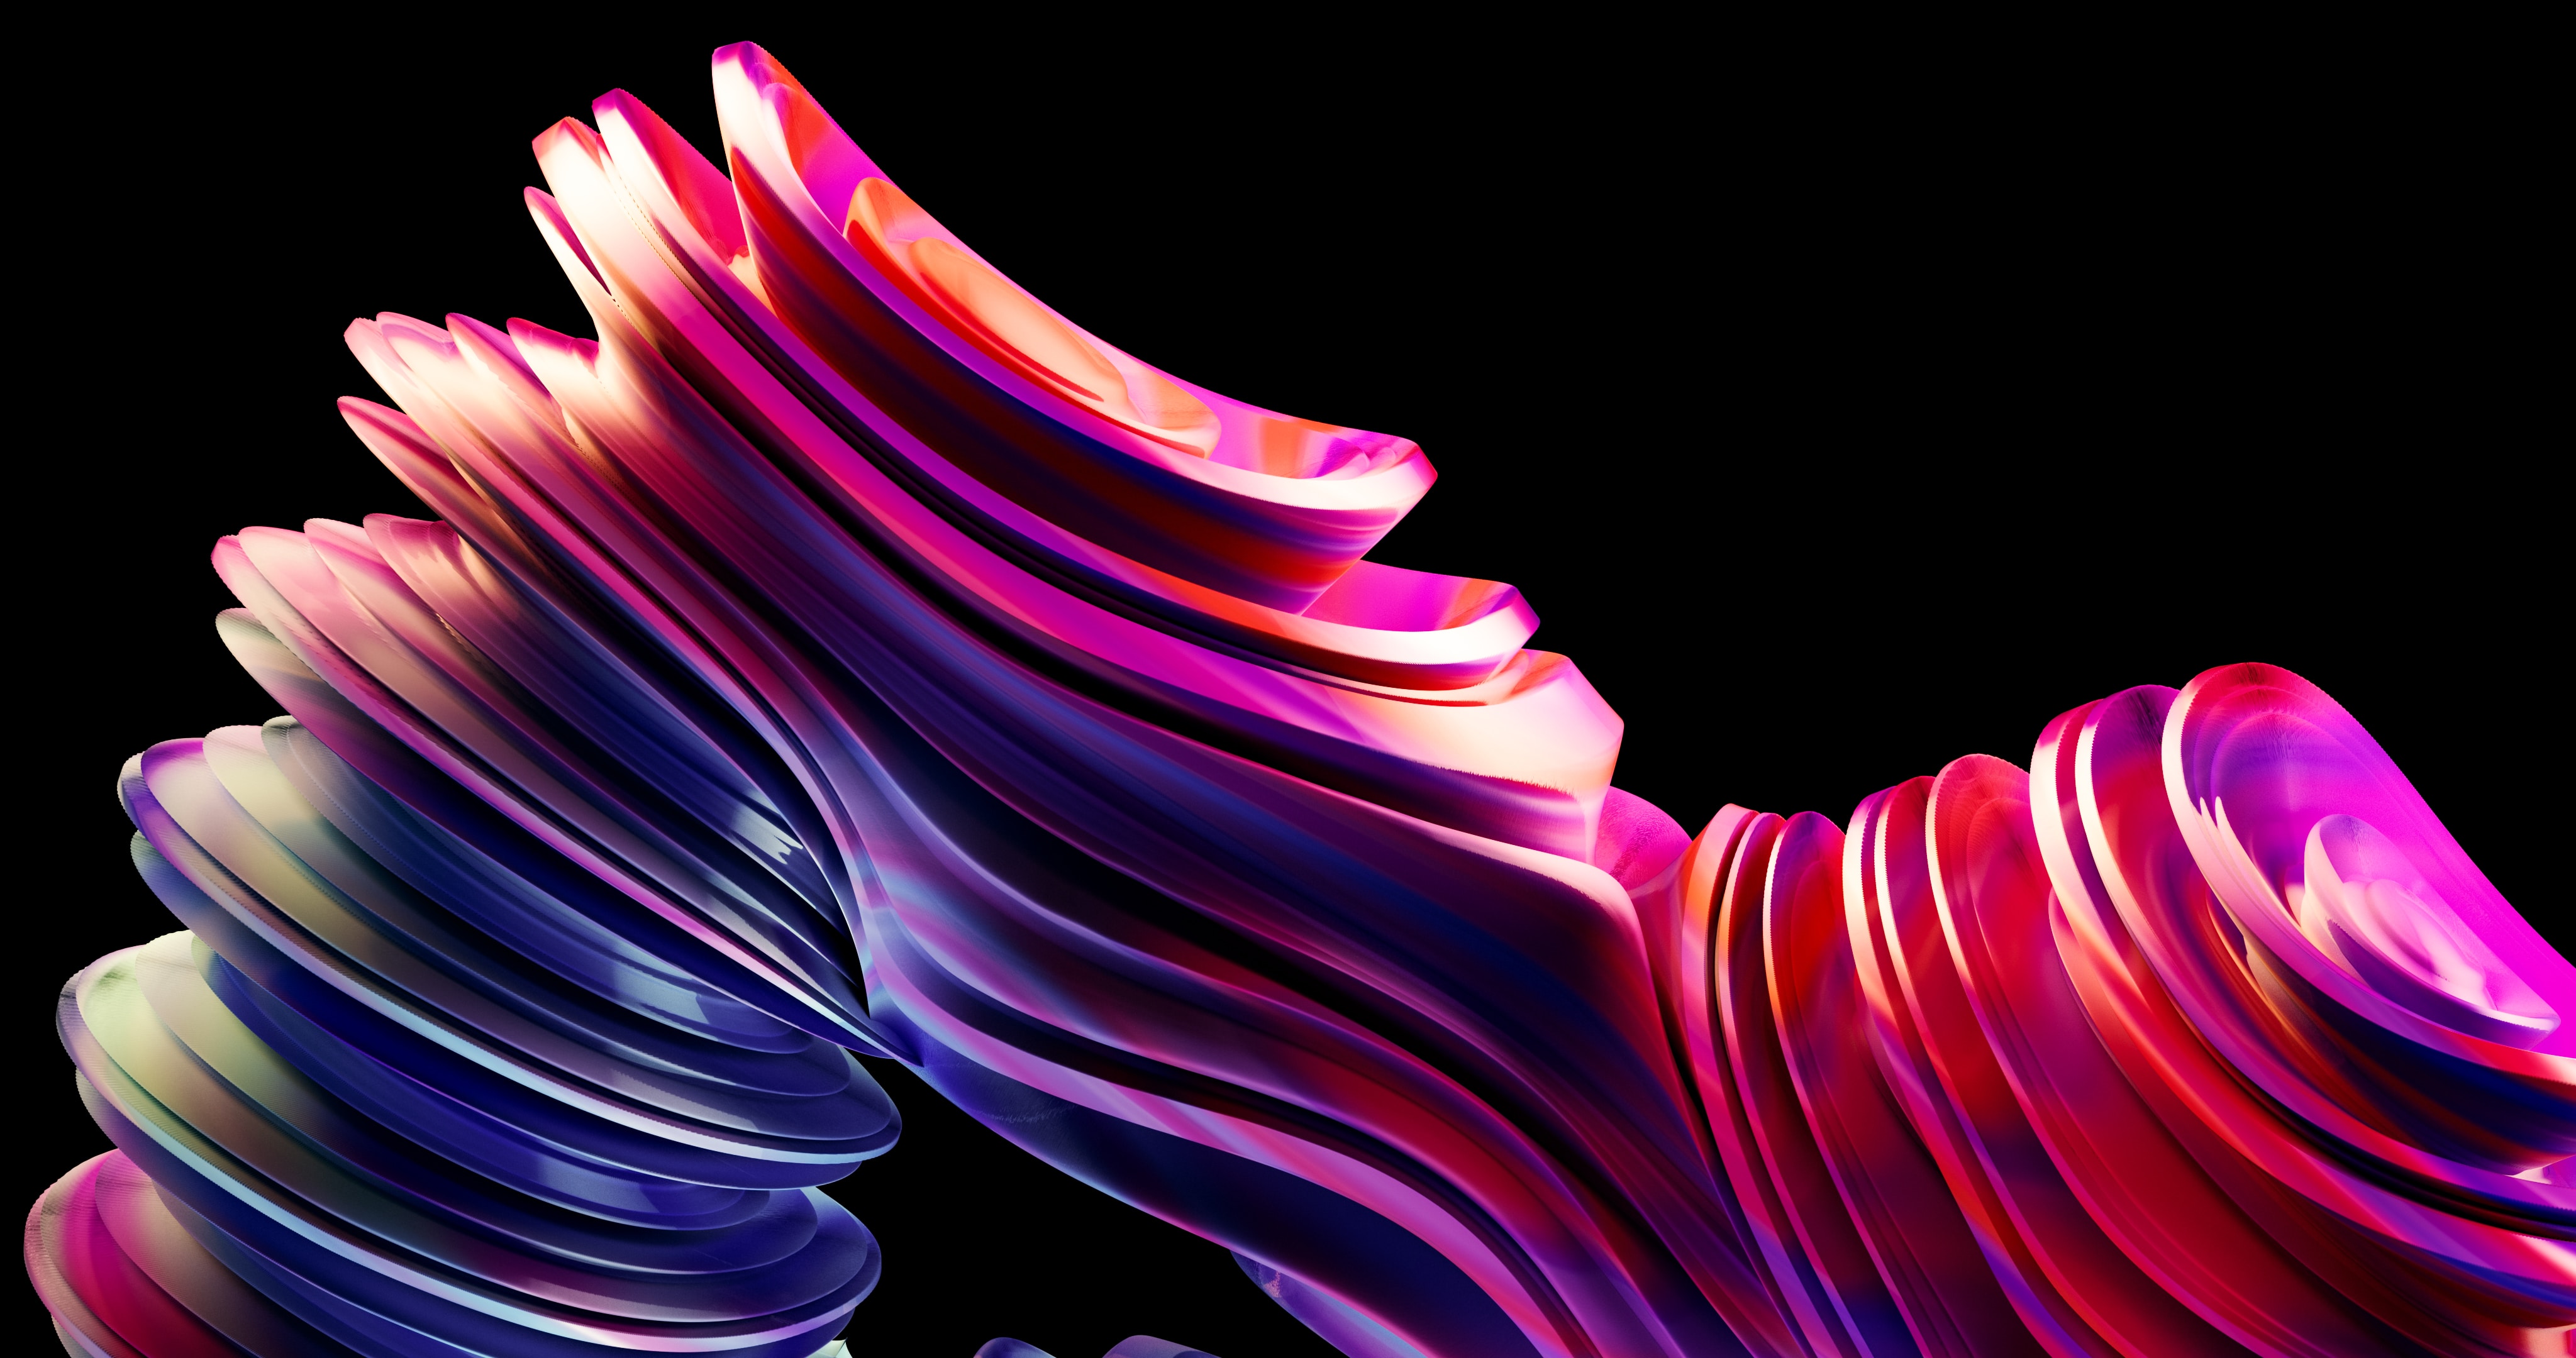 Artistic Shapes HD Wallpaper | Background Image